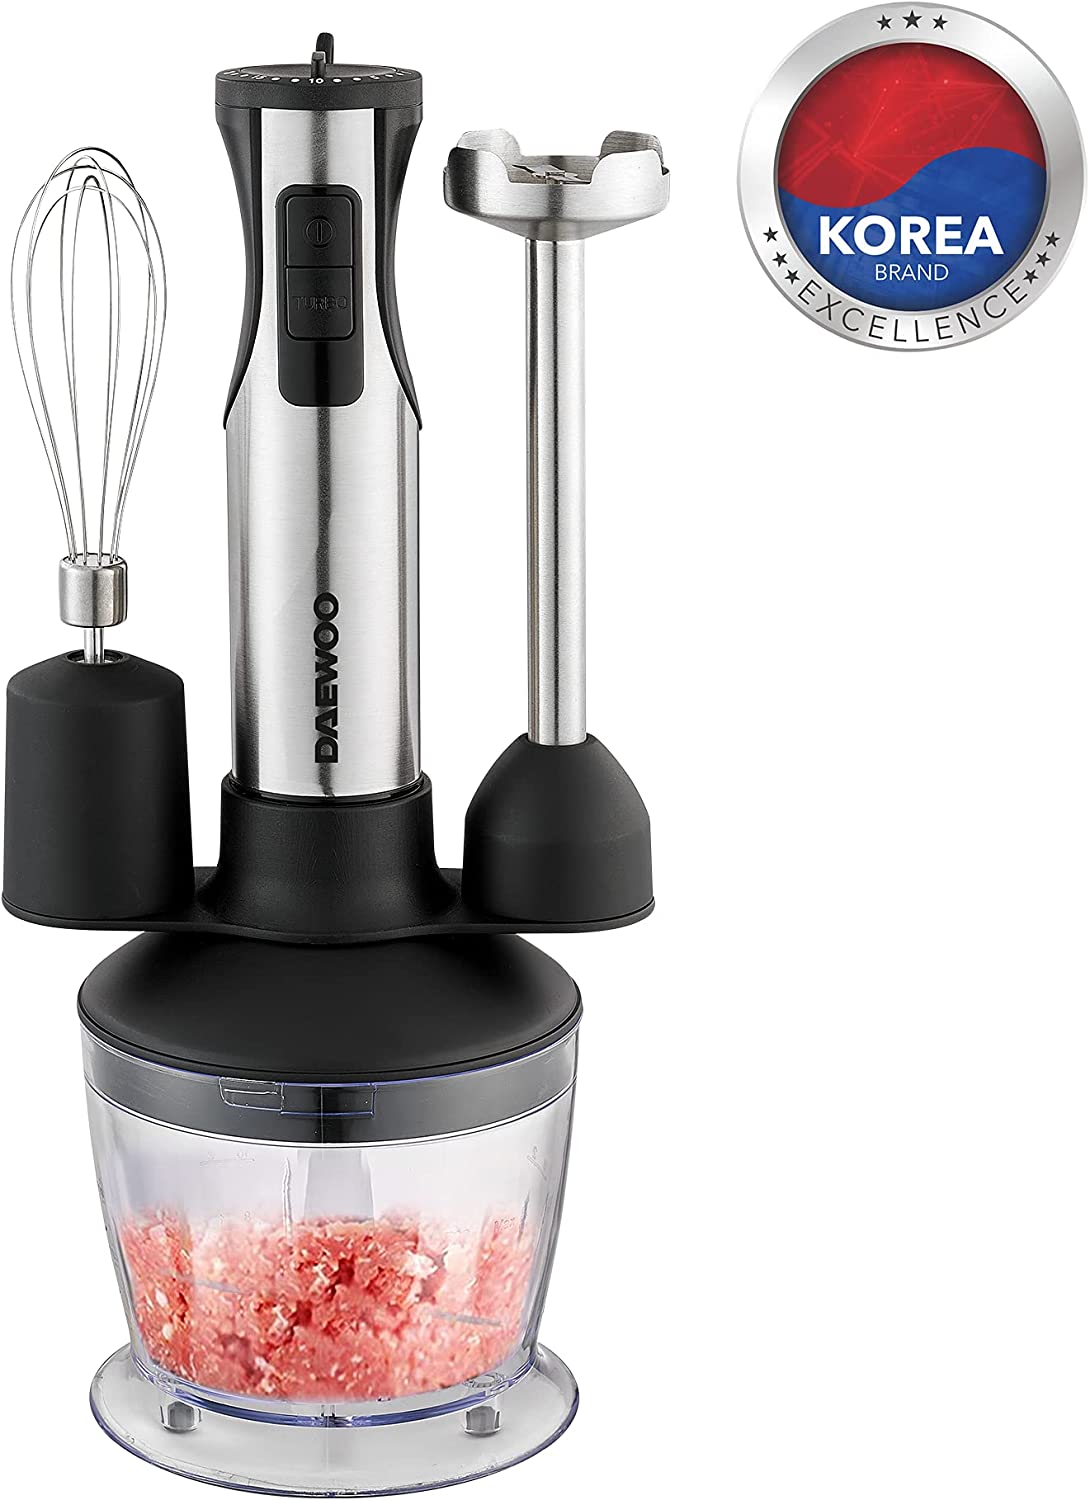 Bundle Set of Daewoo 600W 4-in-1 Stainless Steel Hand Blender with Chopper and Whisk + 700W 2 Slice Bread Toaster